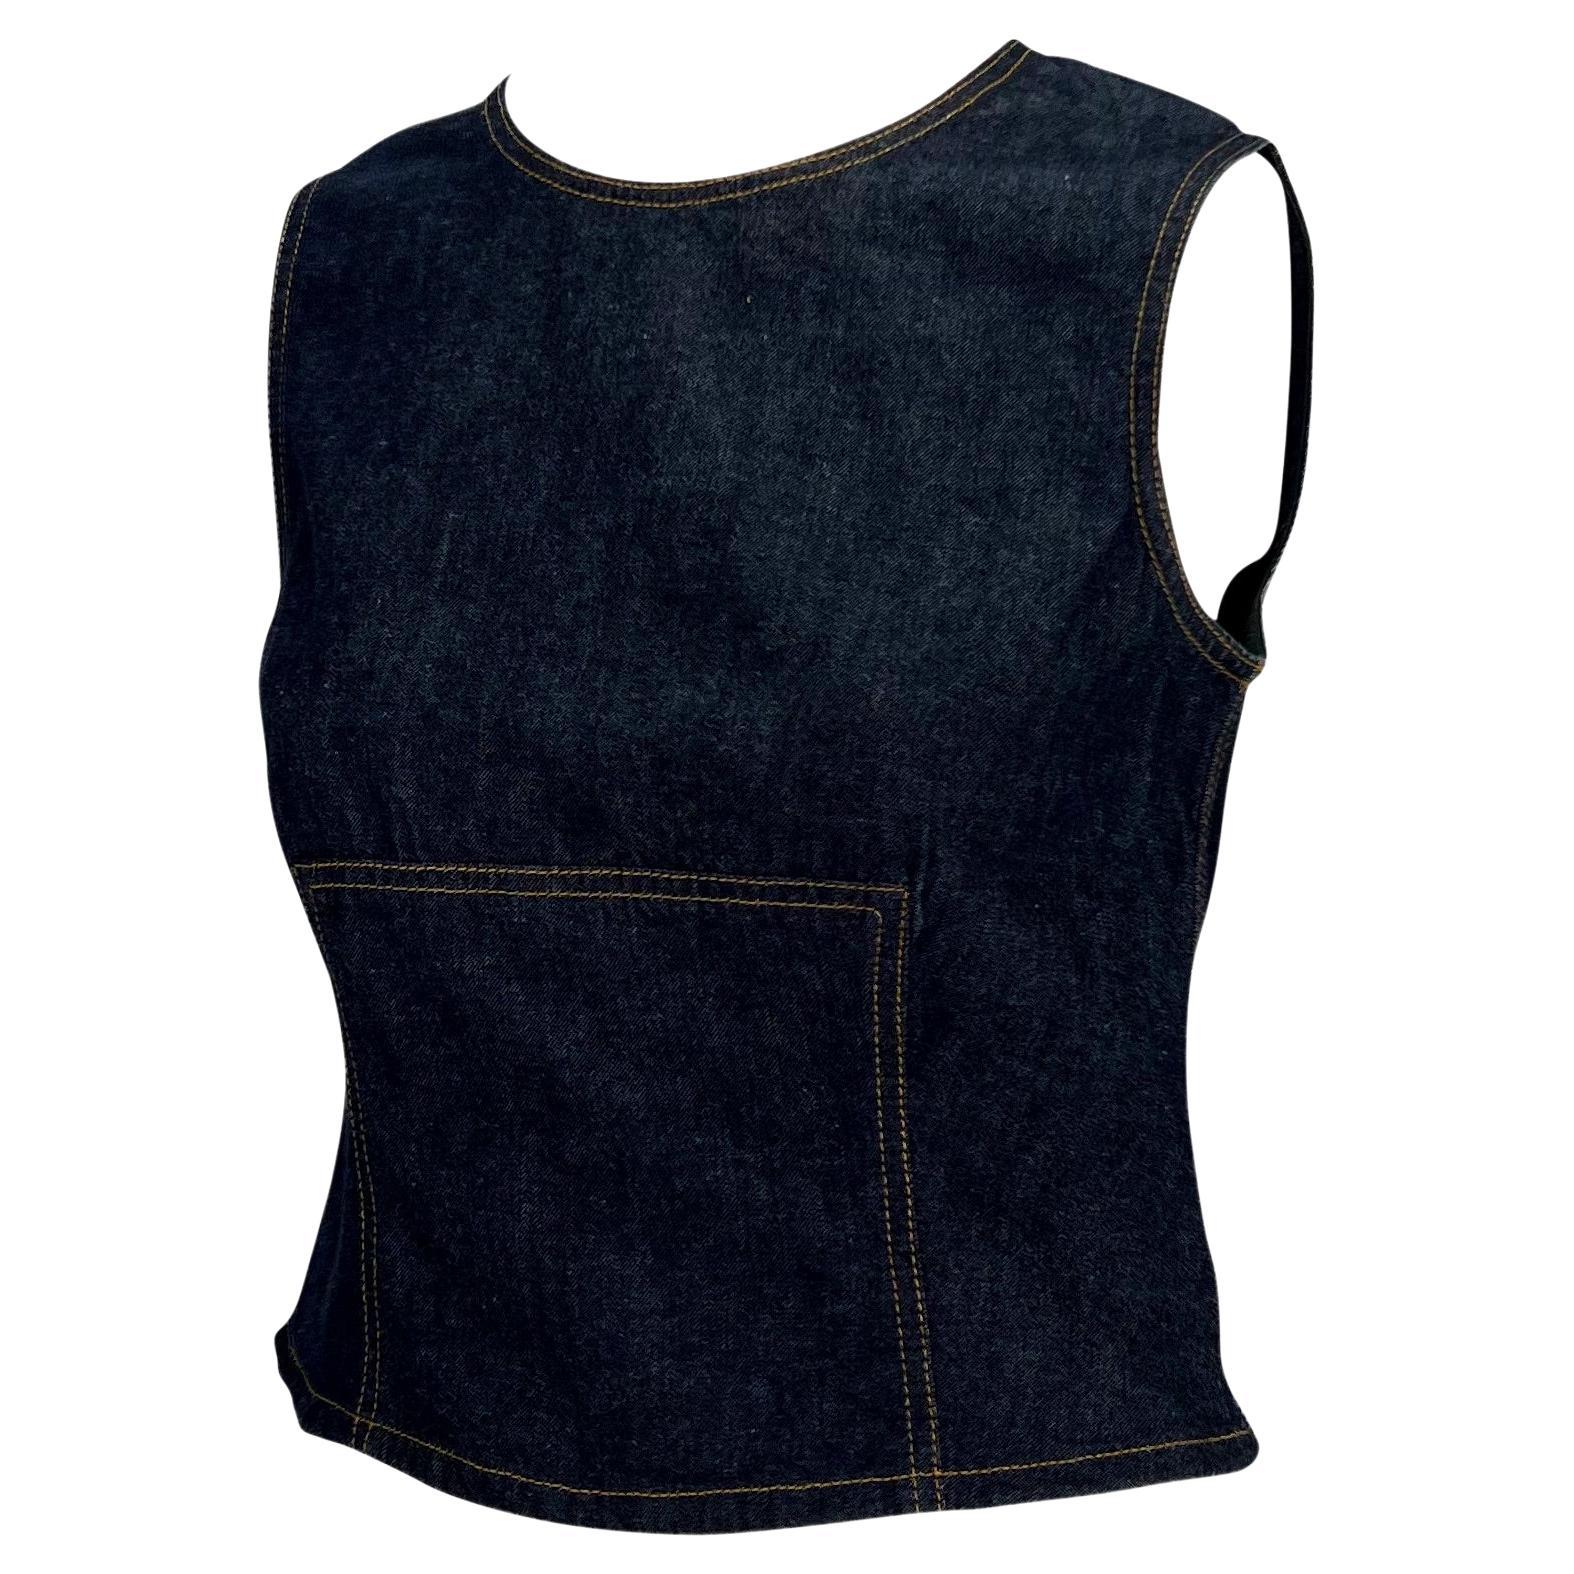 Presenting a sleeveless denim Gucci top, designed by Tom Ford. From the Spring/Summer 2000 collection, this denim top is fashioned with beige stitching, accentuating the female form. A wonderful and chic Y2K piece, this versatile top is sure to